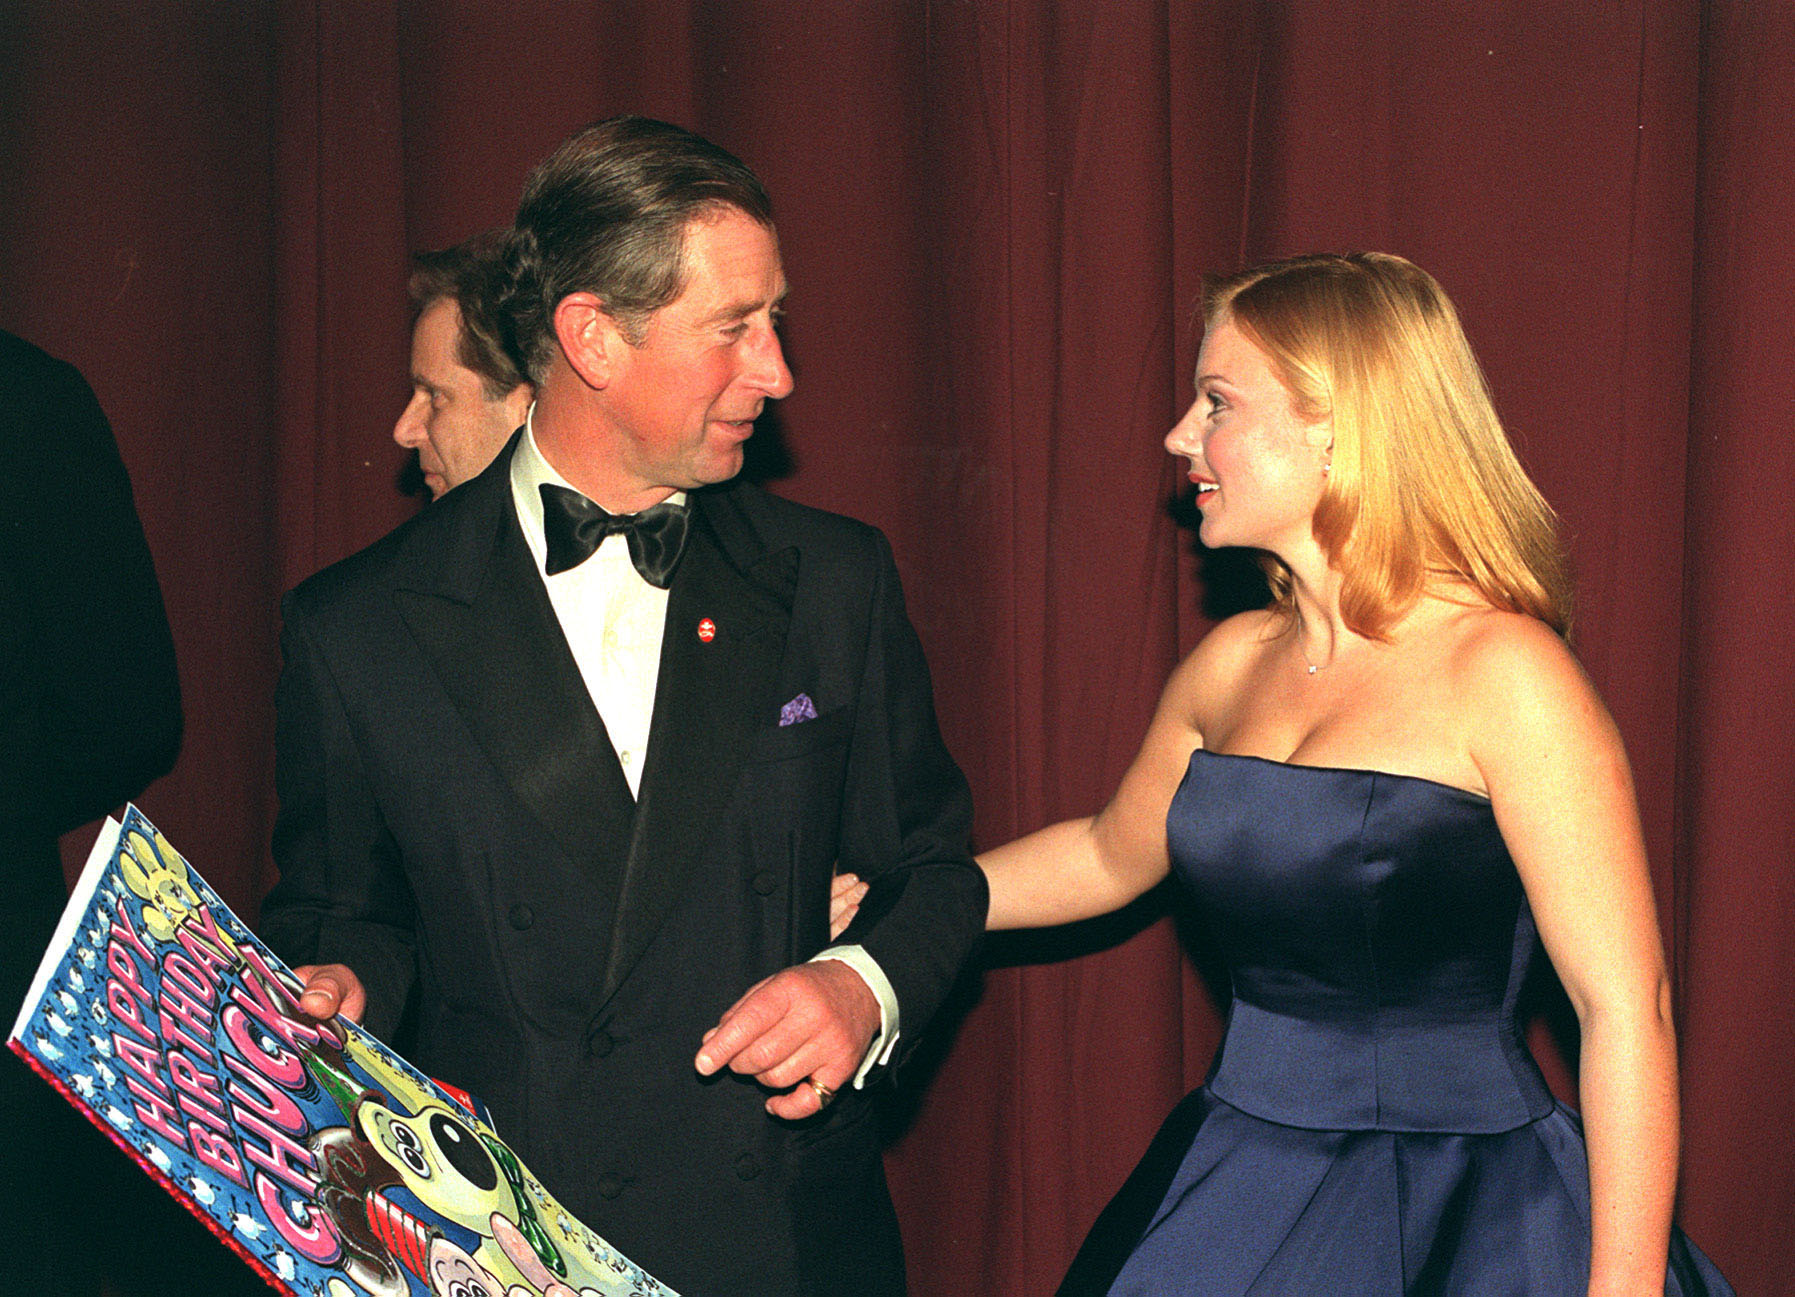 The Prince of Wales with former Spice Girl Geri Halliwell on his arm with a card presented to him backstage, after the Prince's Trust Comedy Gala at the Lyceum Theatre in London. (John Stillwell - PA Images—PA Images via Getty Images)